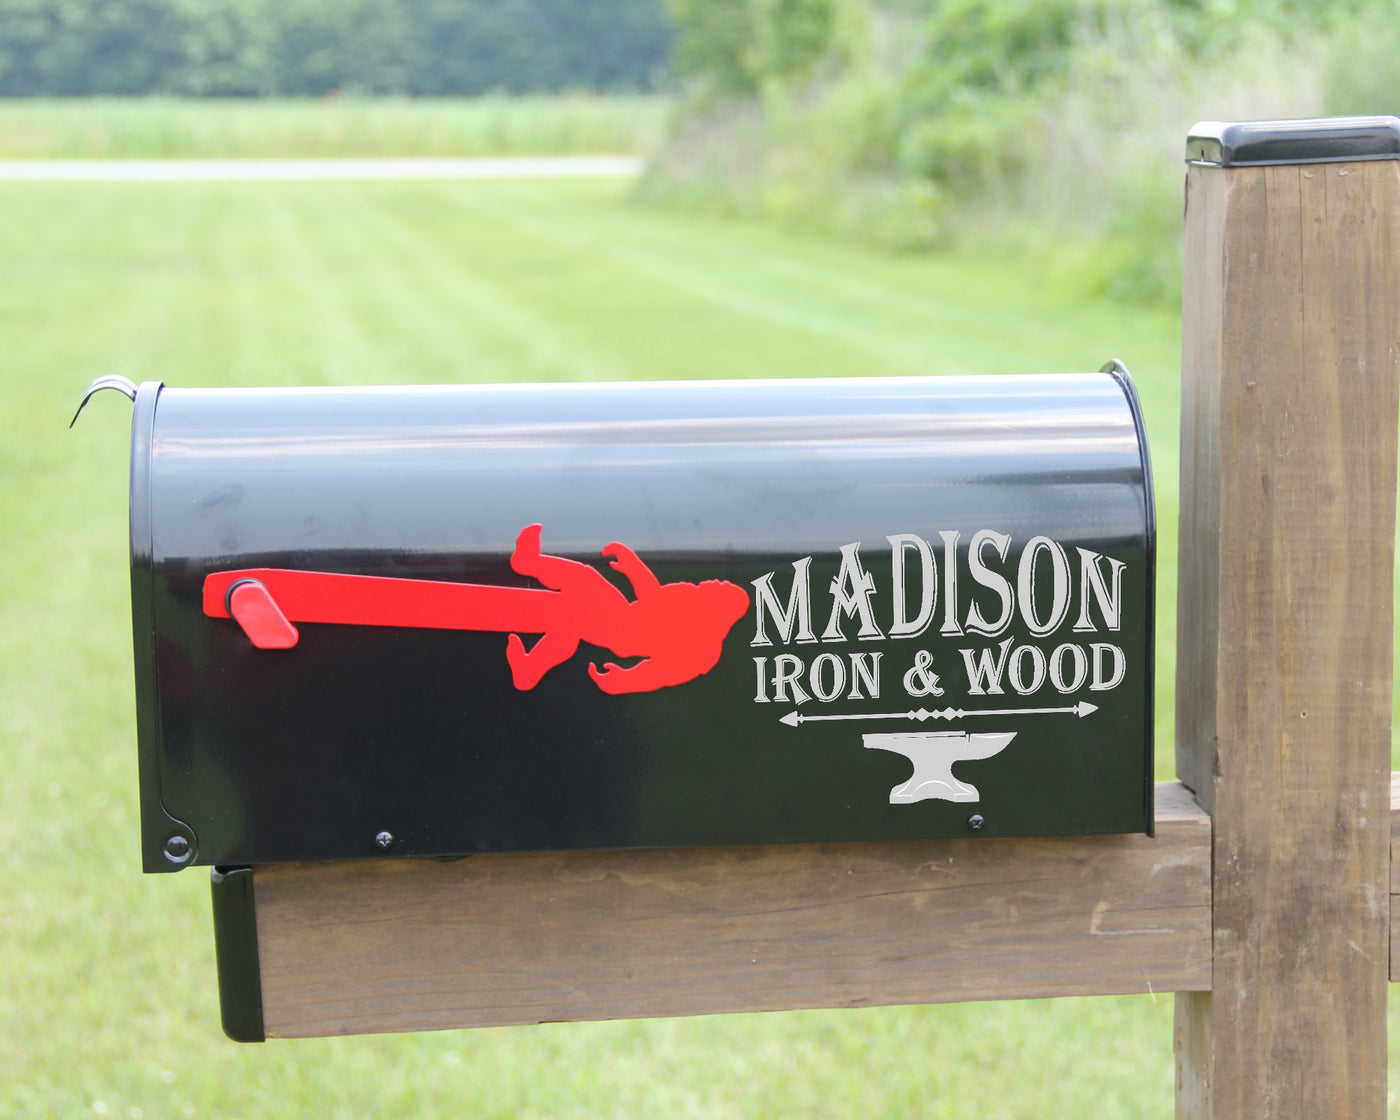 Big Foot Mailbox Flag - Madison Iron and Wood - Mailbox Post Decor - metal outdoor decor - Steel deocrations - american made products - veteran owned business products - fencing decorations - fencing supplies - custom wall decorations - personalized wall signs - steel - decorative post caps - steel post caps - metal post caps - brackets - structural brackets - home improvement - easter - easter decorations - easter gift - easter yard decor